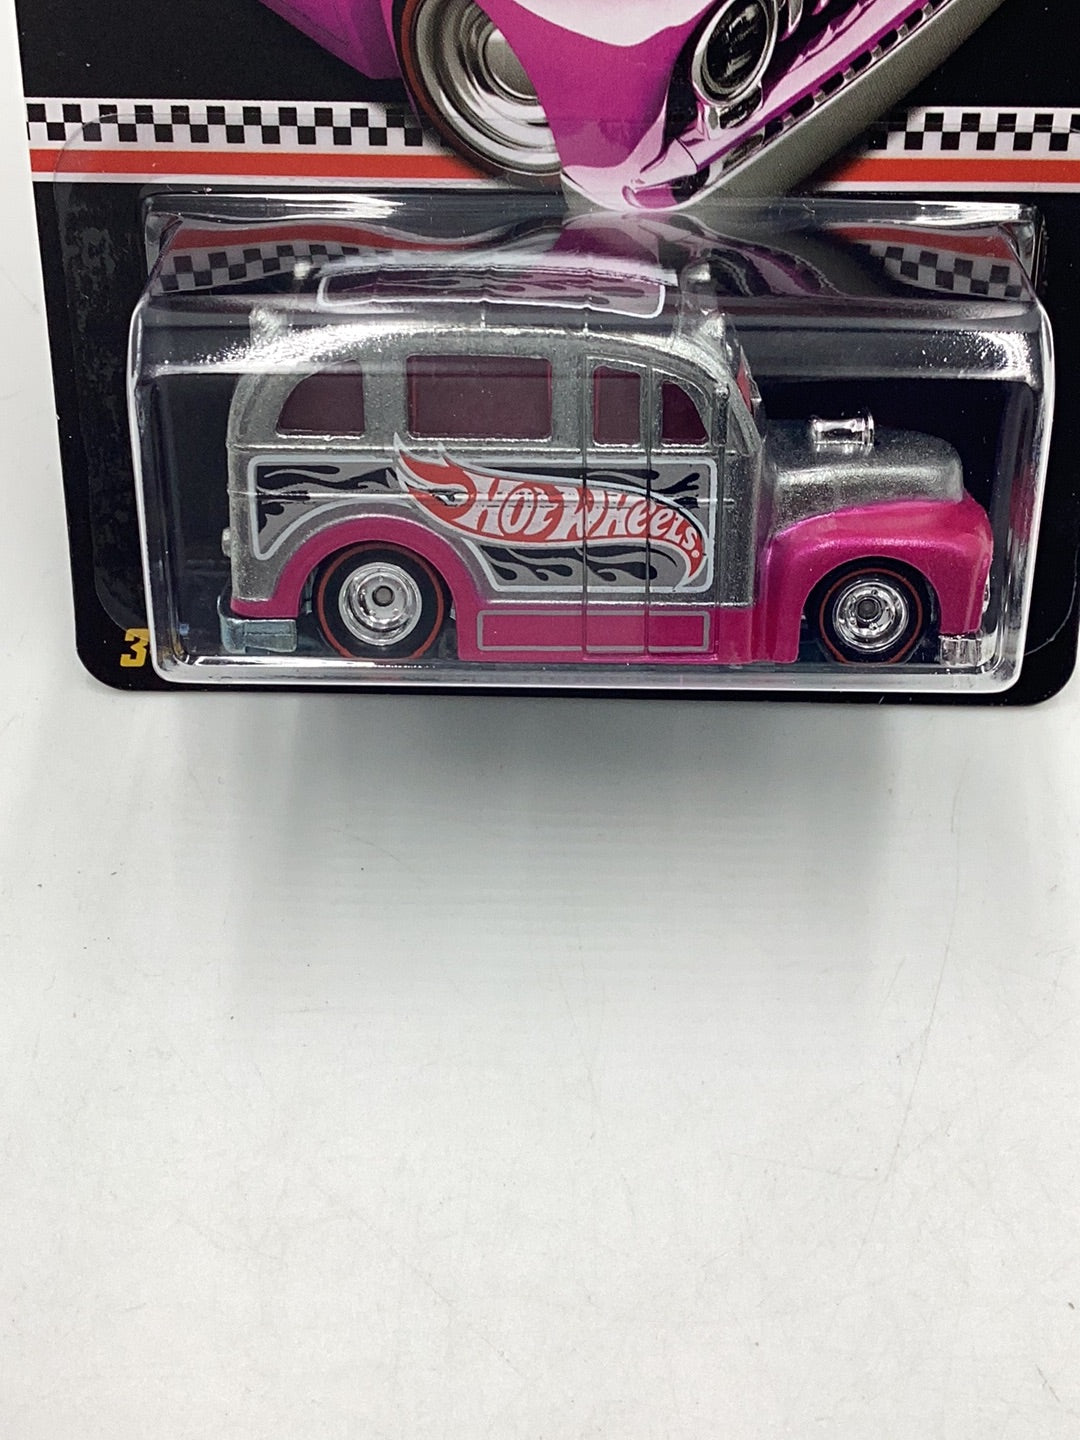 2013 Hot wheels collectors edition Zamac School Busted with protector